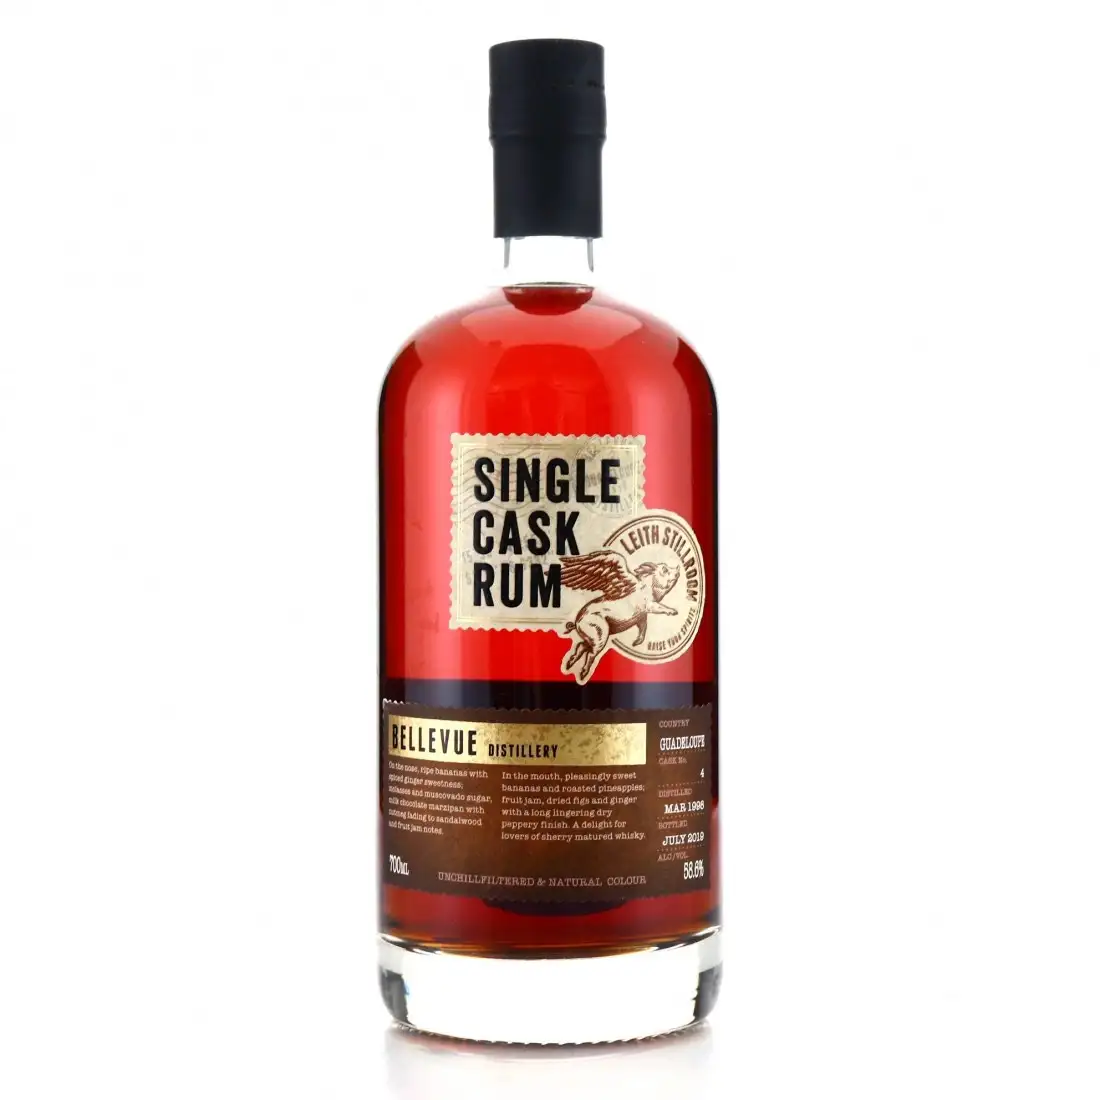 Image of the front of the bottle of the rum Leith Stillroom Single Cask Rum